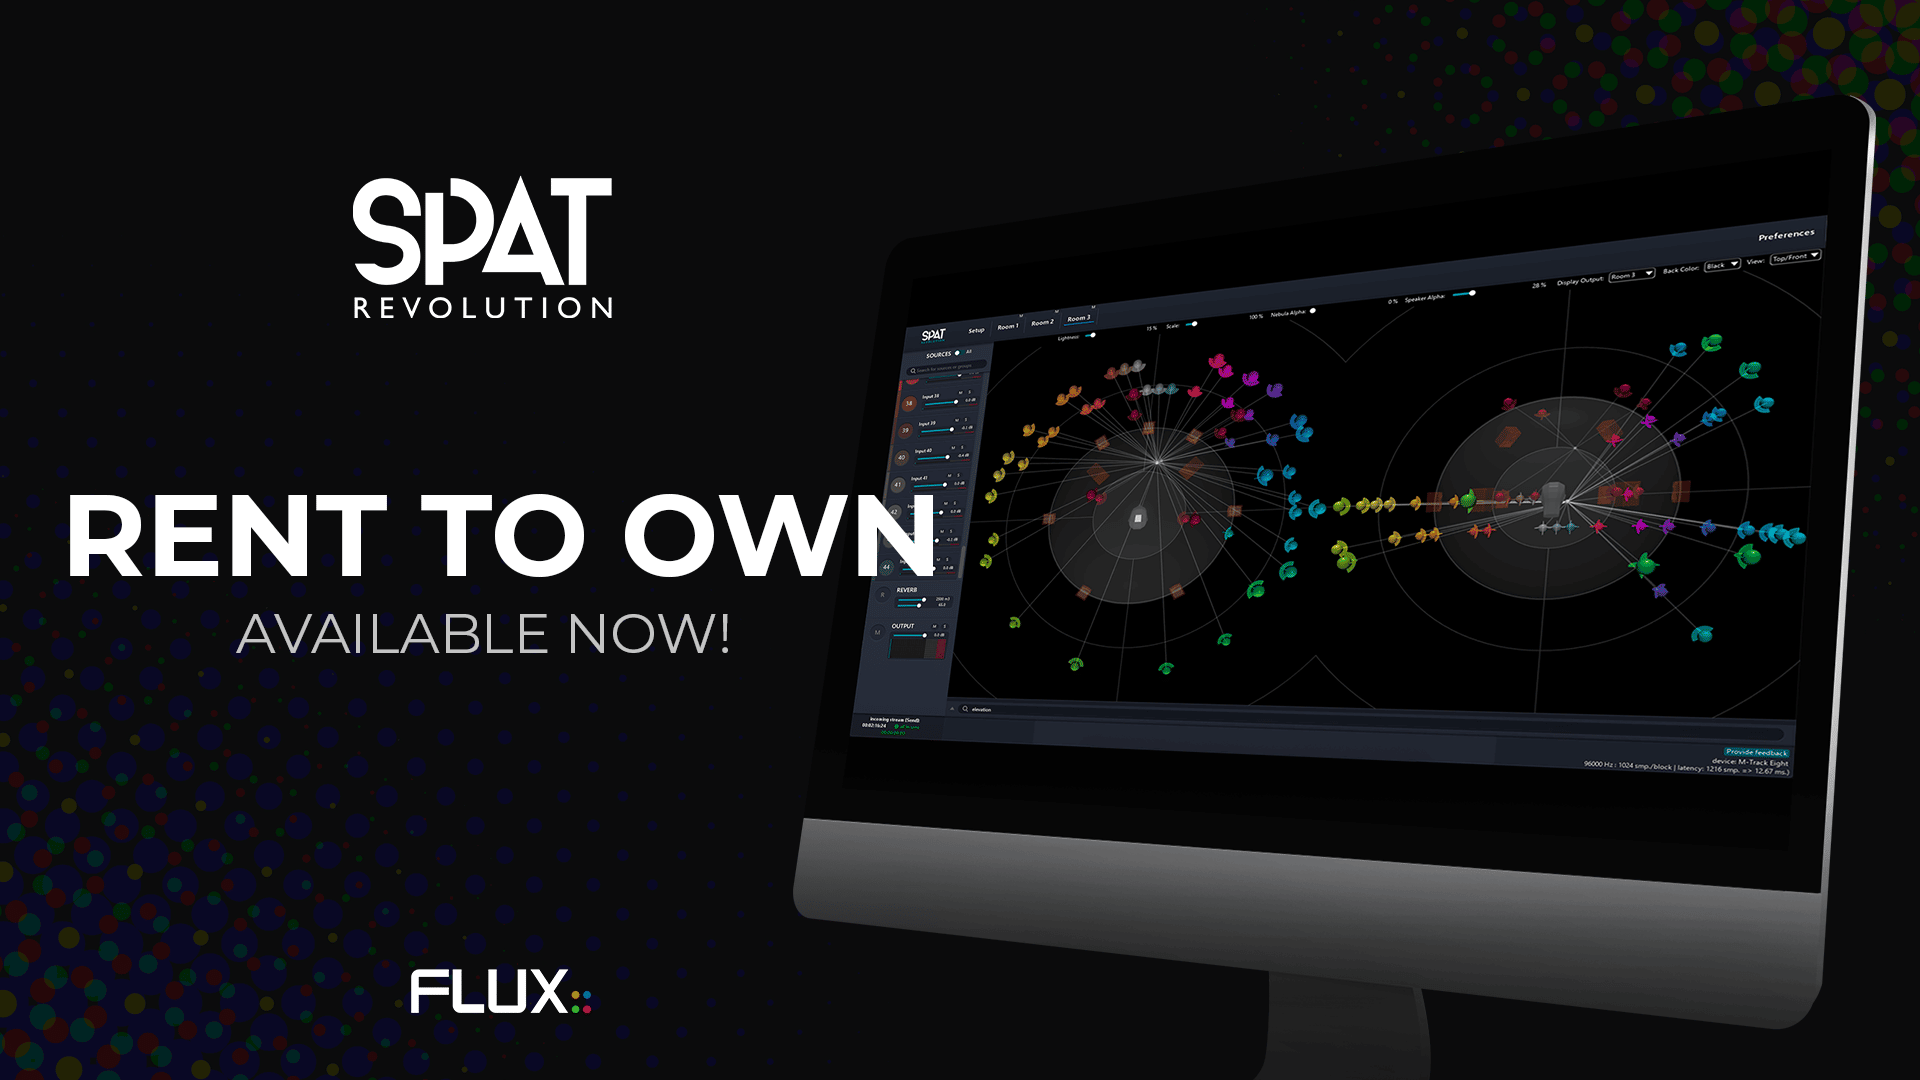 SPAT Revolution - Rent To Own